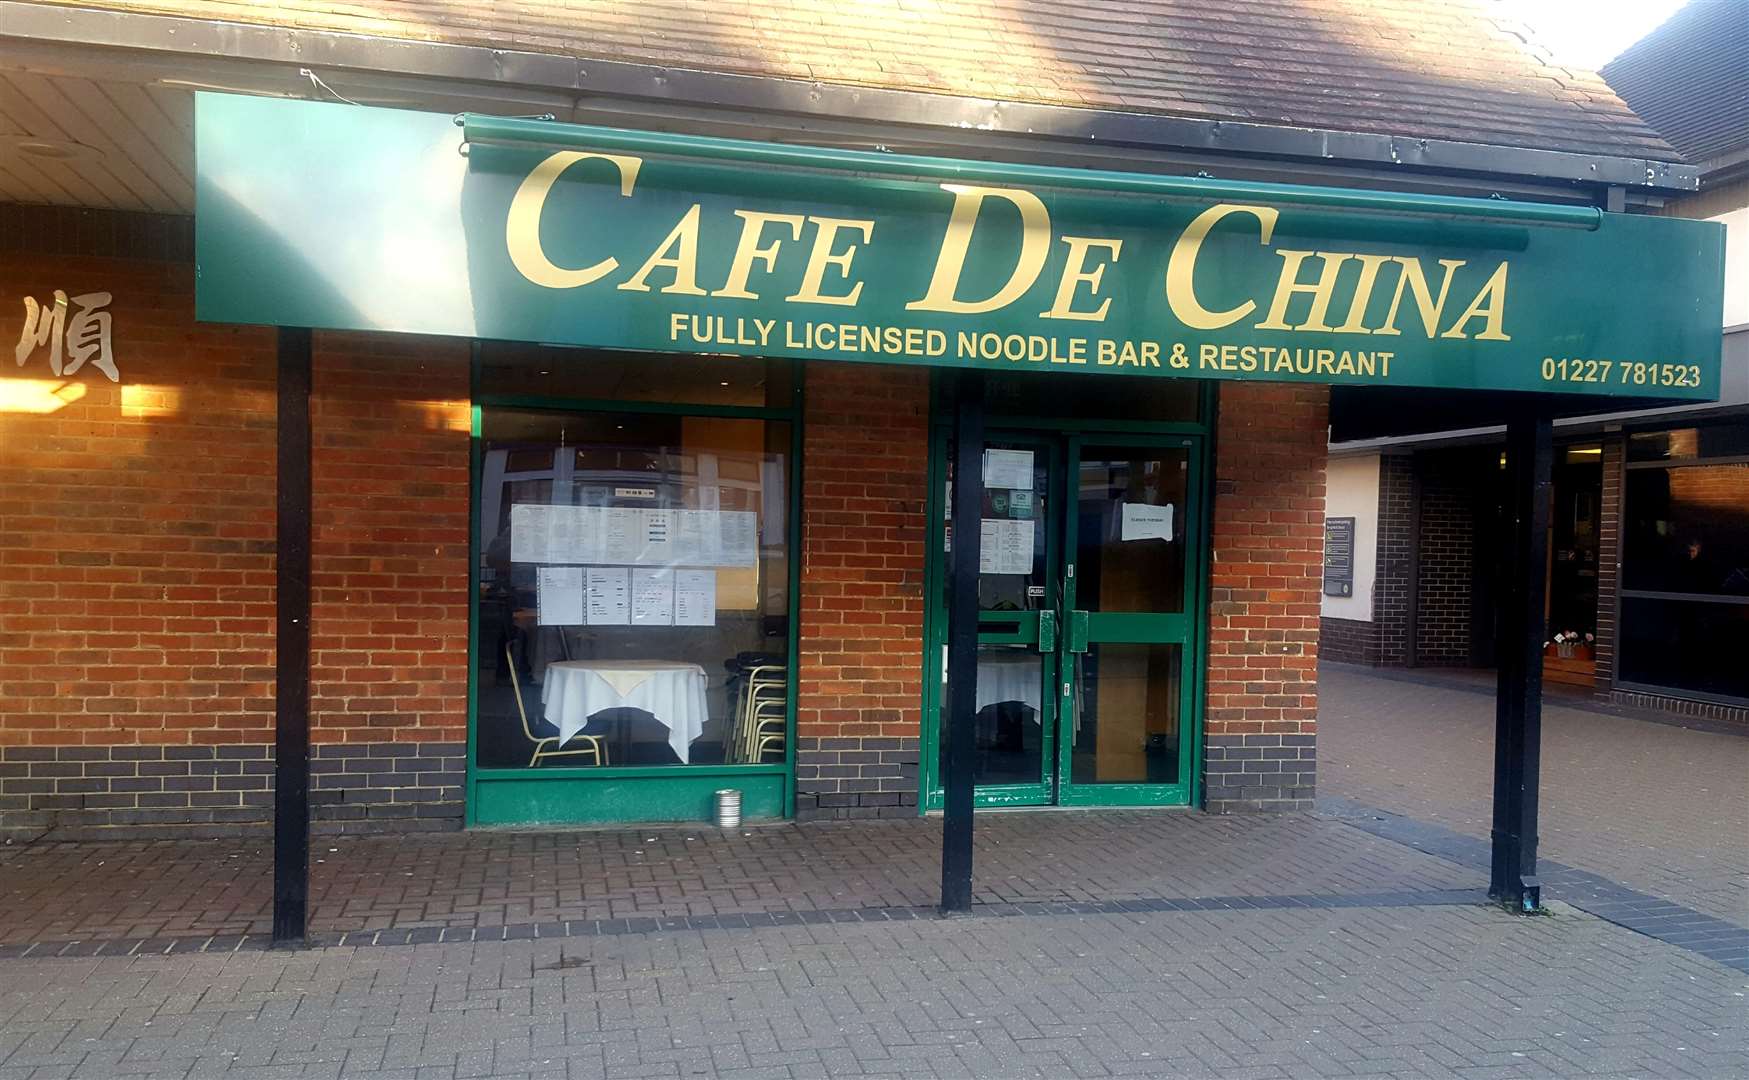 Cafe de China in Canterbury was ordered to make "major improvements"